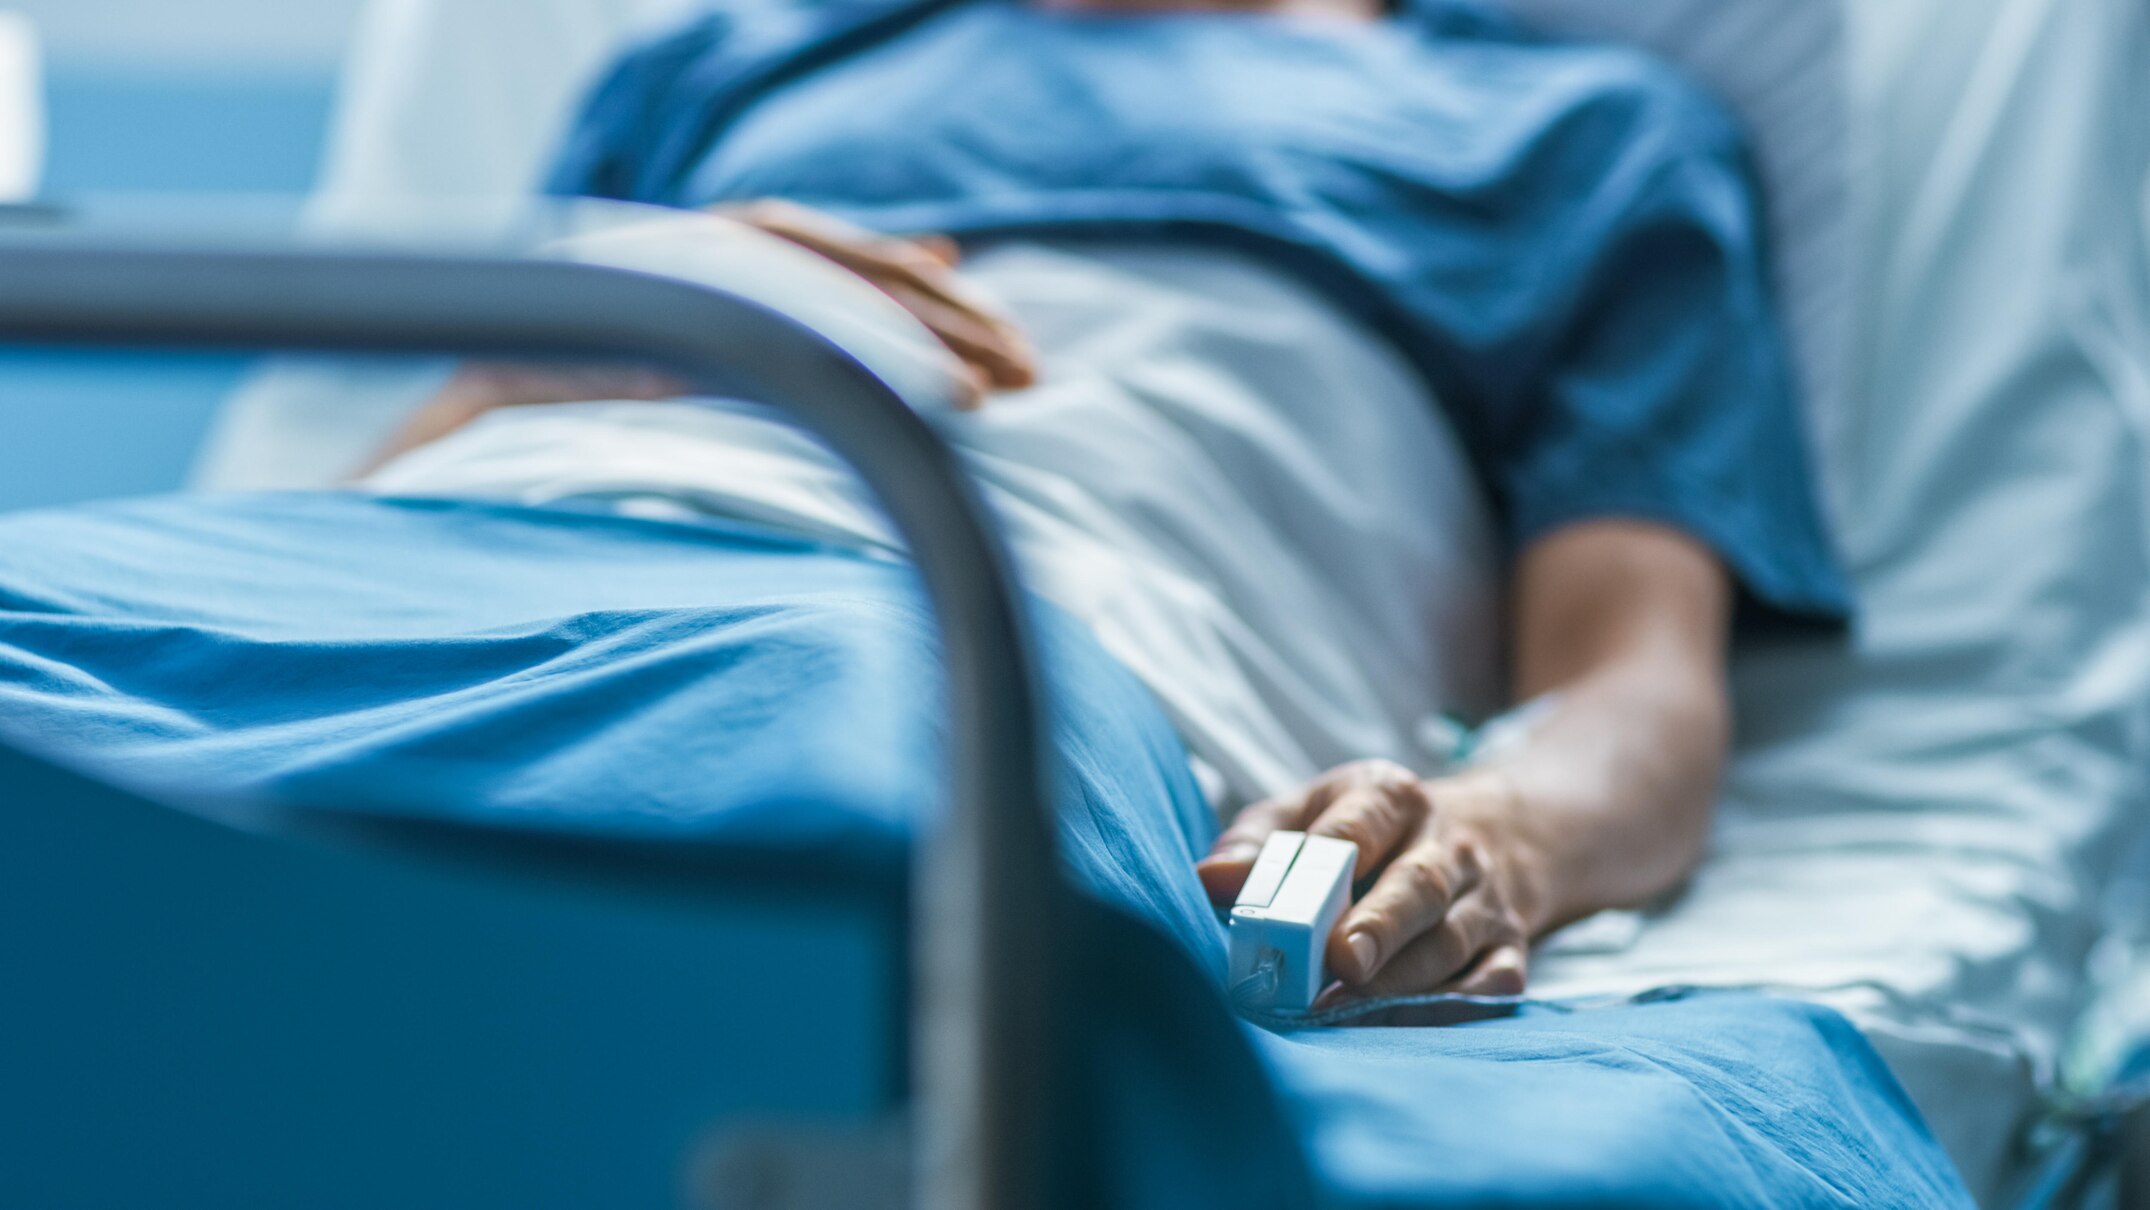 elective surgery wait times almost double in 20 years as patients wait longer in emergency